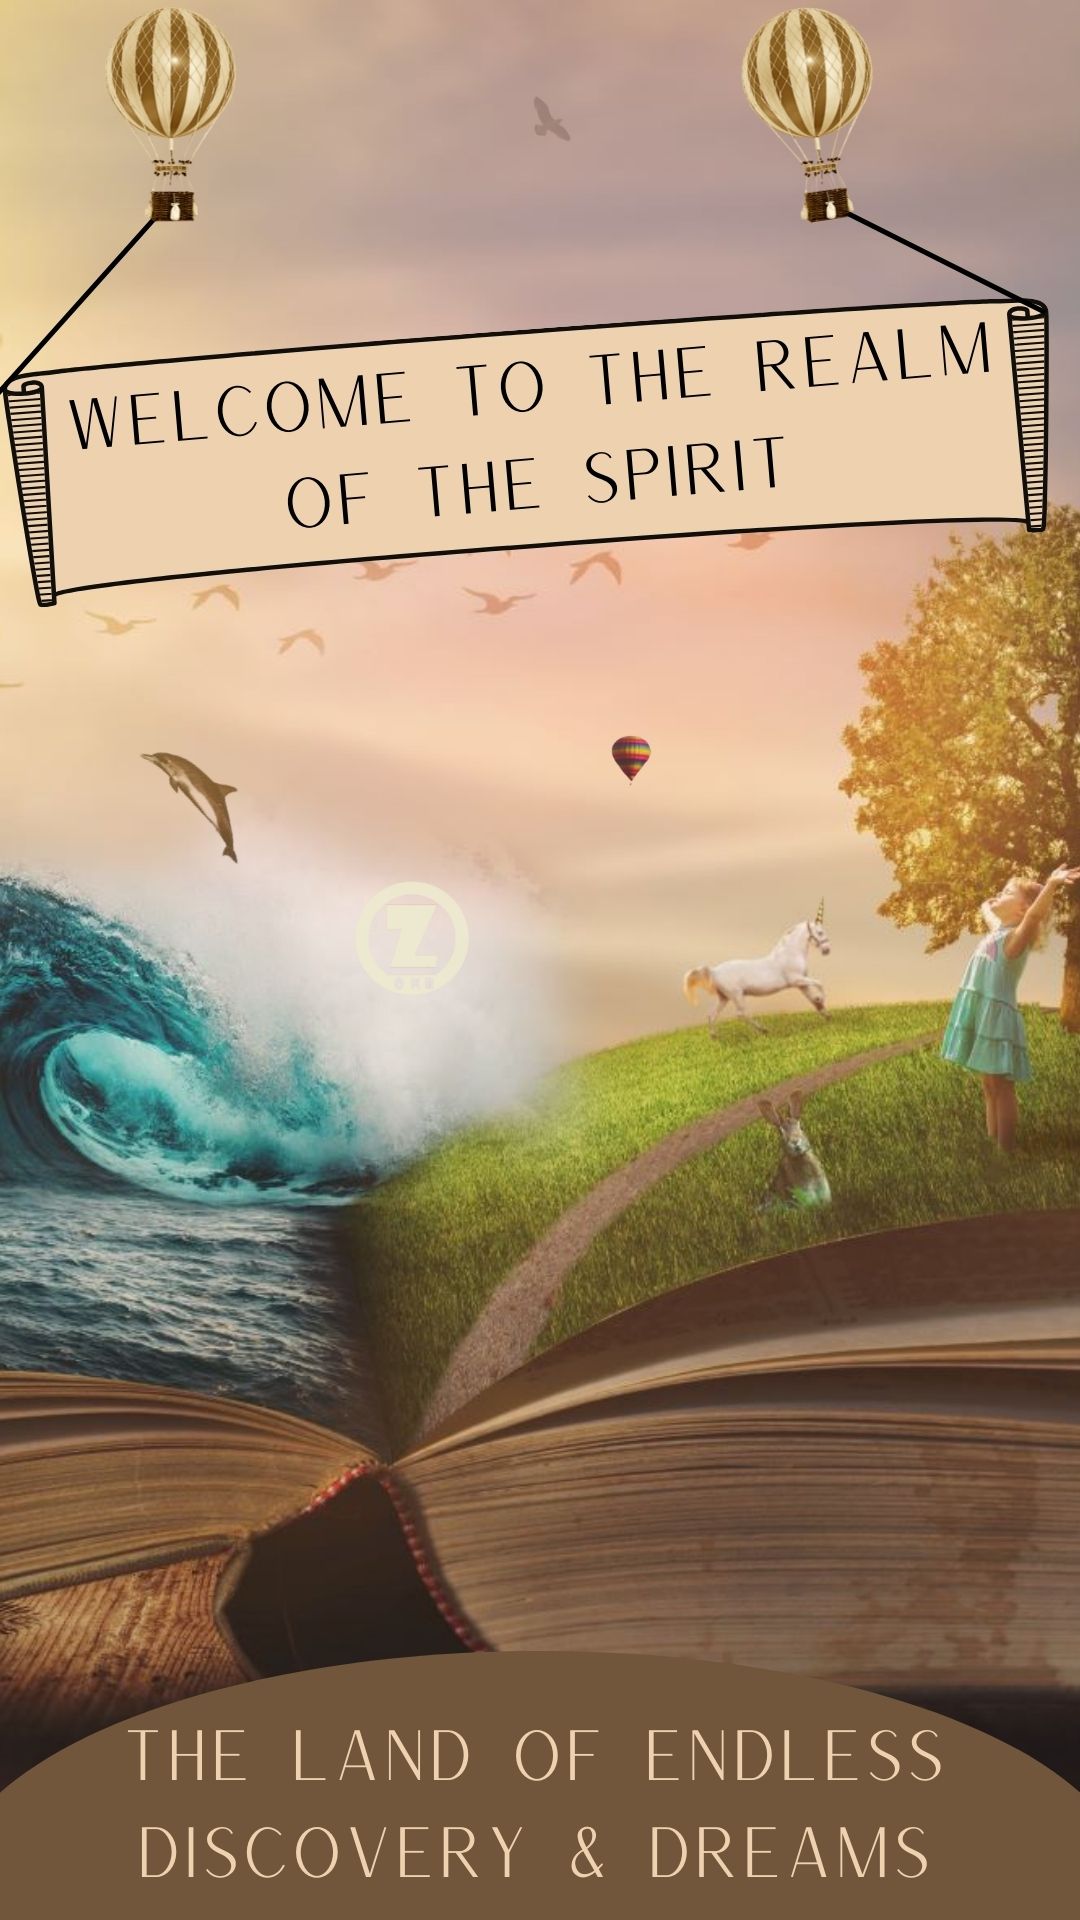 You are currently viewing Welcome to the “Realm of the Spirit”; the Land of Endless Discovery & Dreams – Step 11 begins